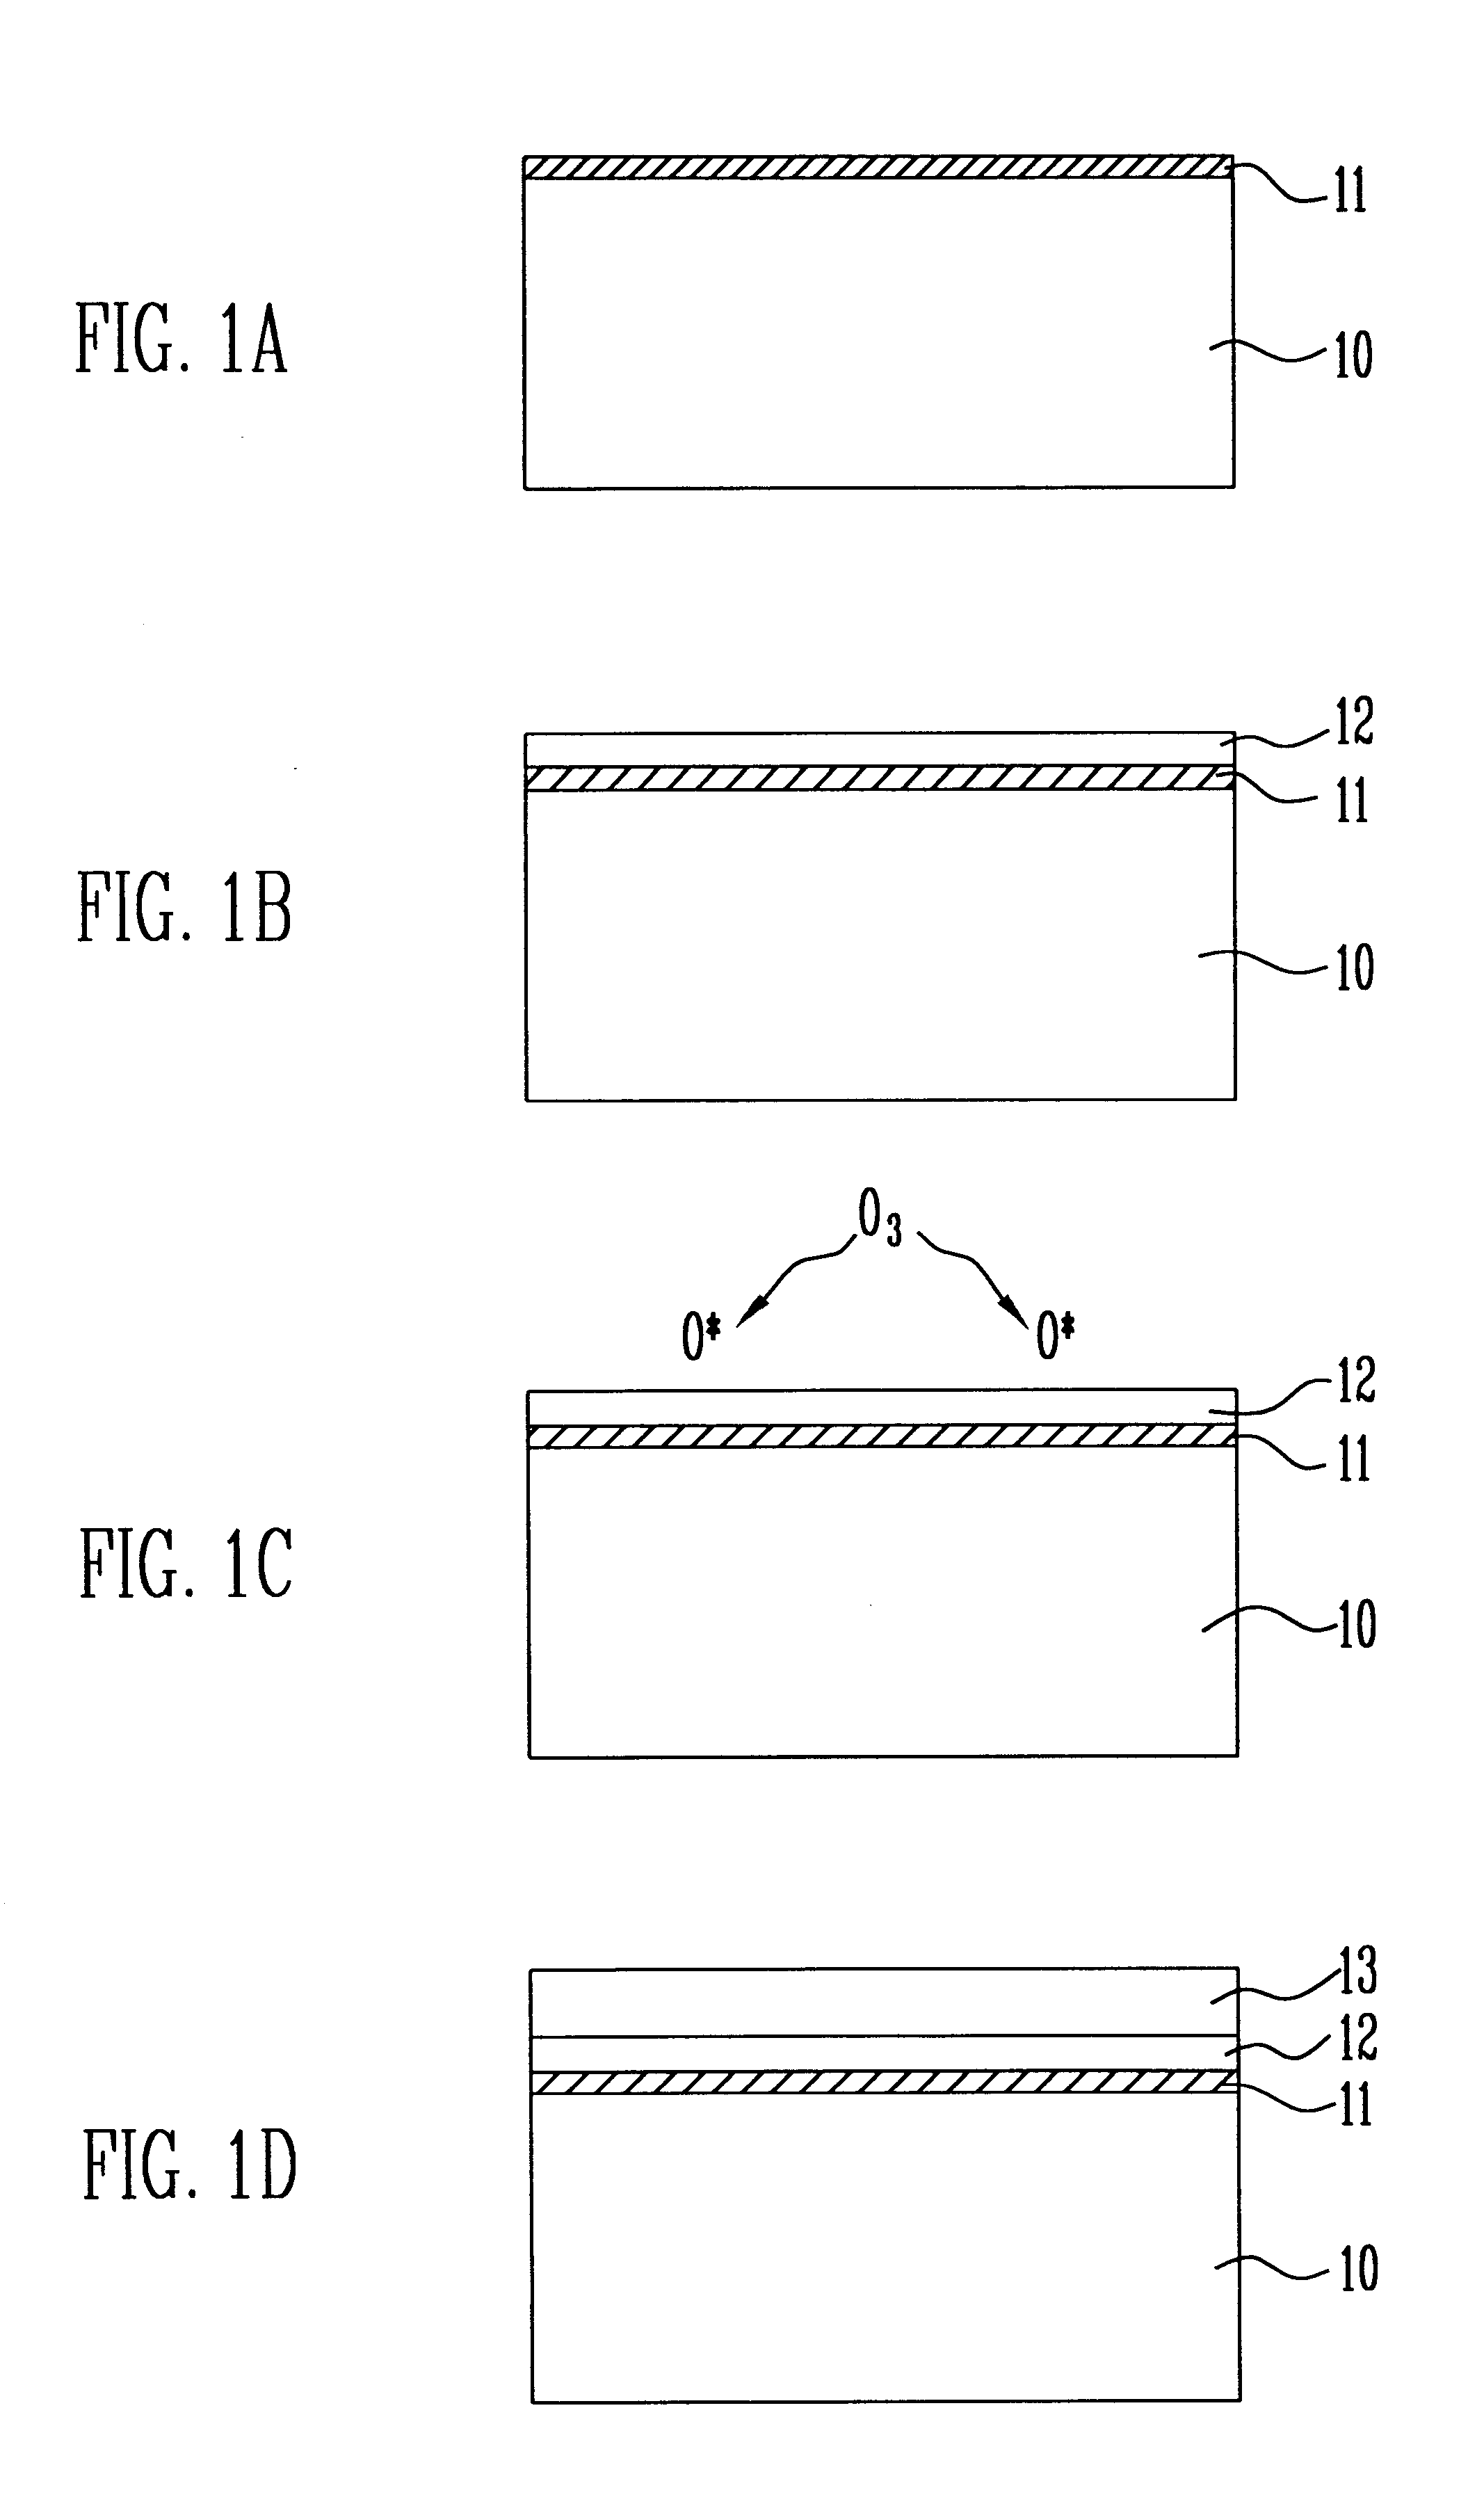 Method of manufacturing a capacitor in a semiconductor device using a high dielectric tantalum oxide or barium strontium titanate material that is treated in an ozone plasma